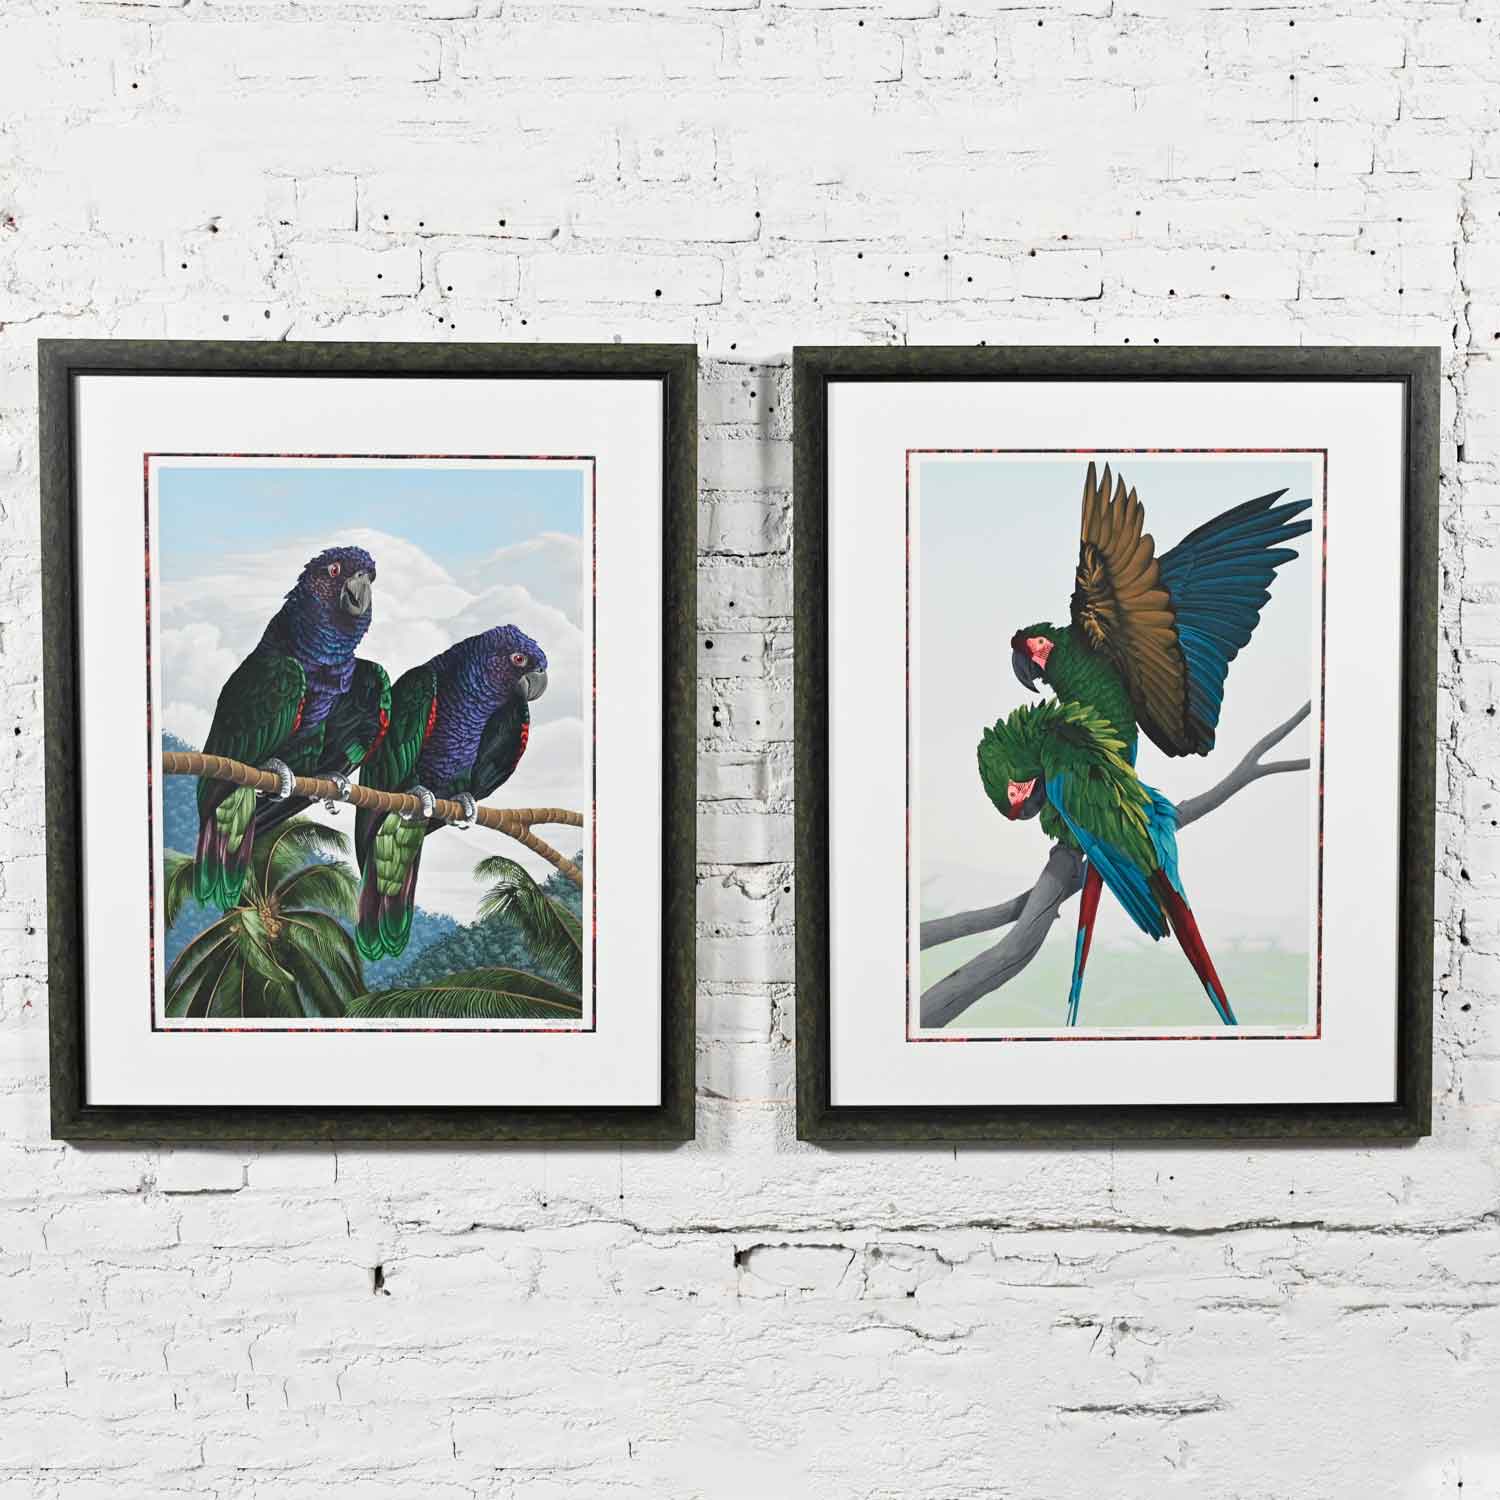 Vintage Dallas John Limited Edition Hand Signed Imperial Mates & Military Macaws Fine Art Serigraph Parrots